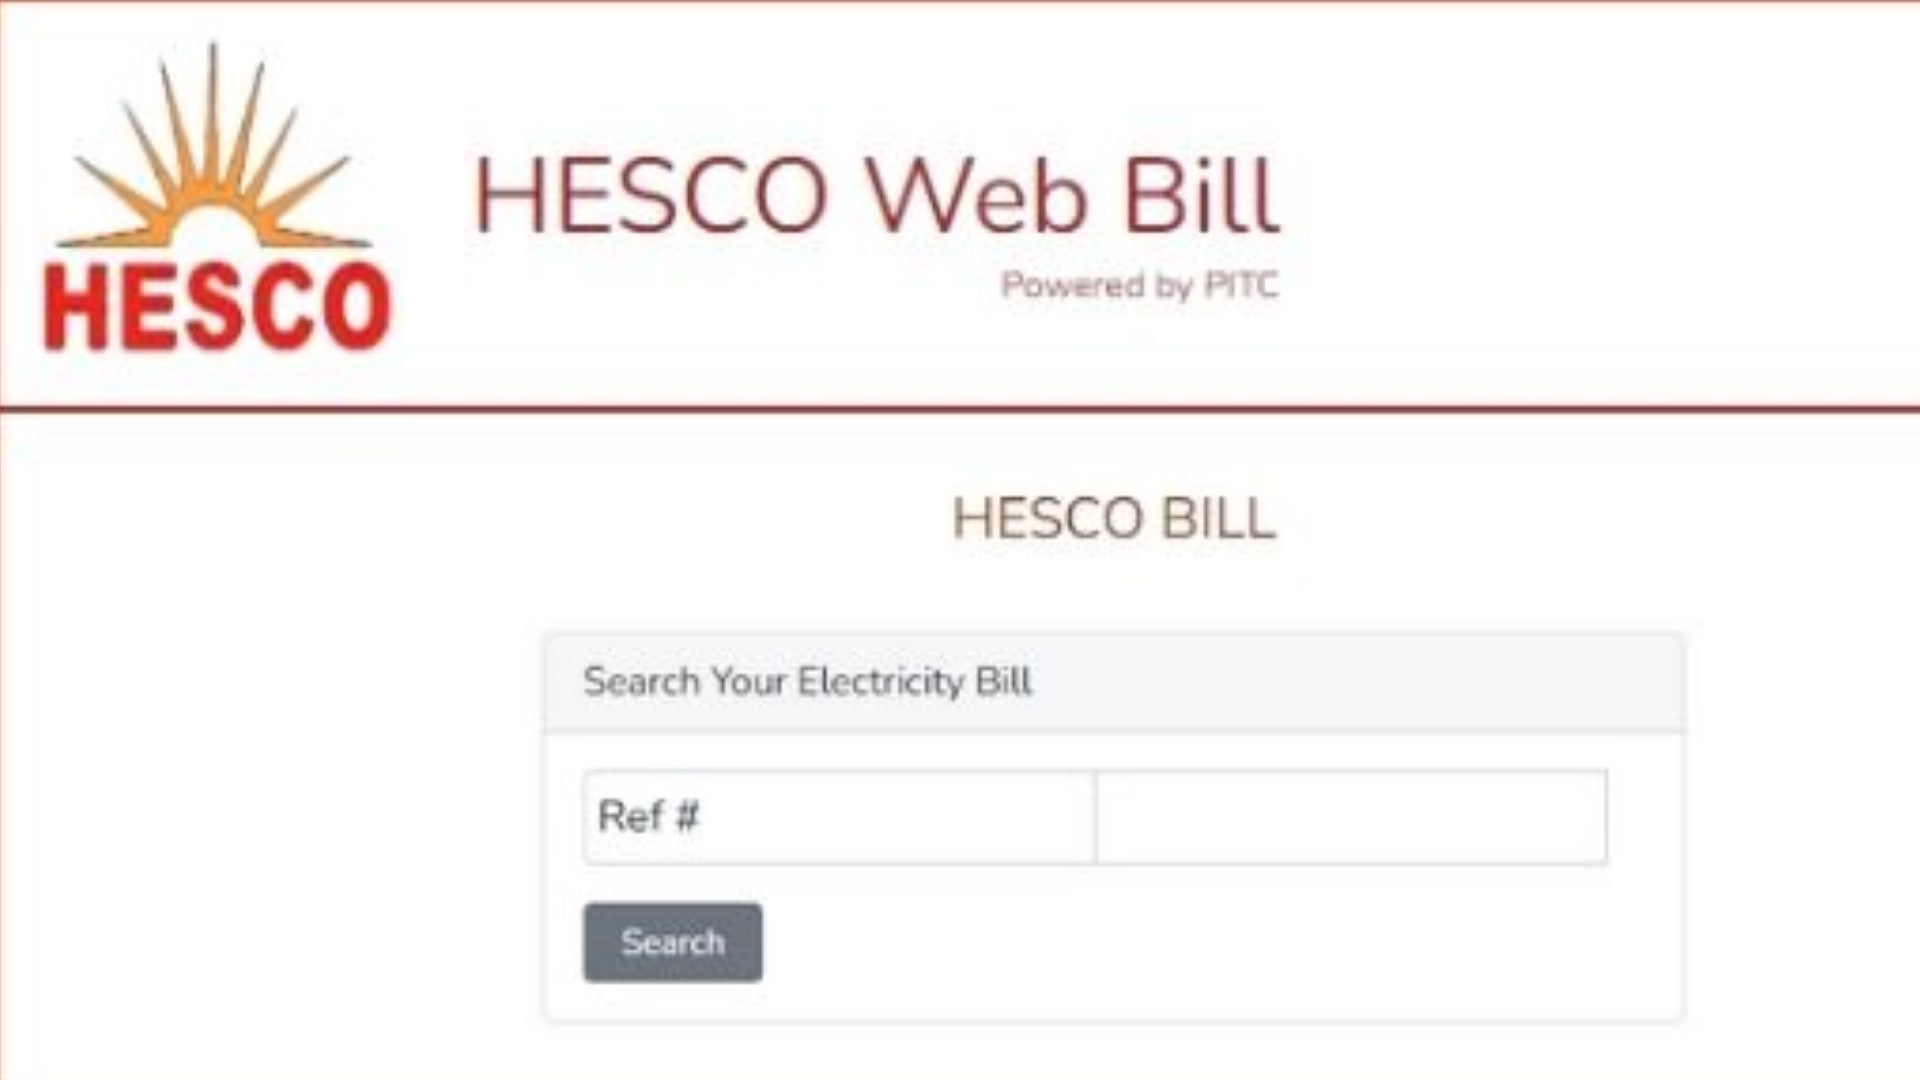 How to Check the HESCO Online Bill